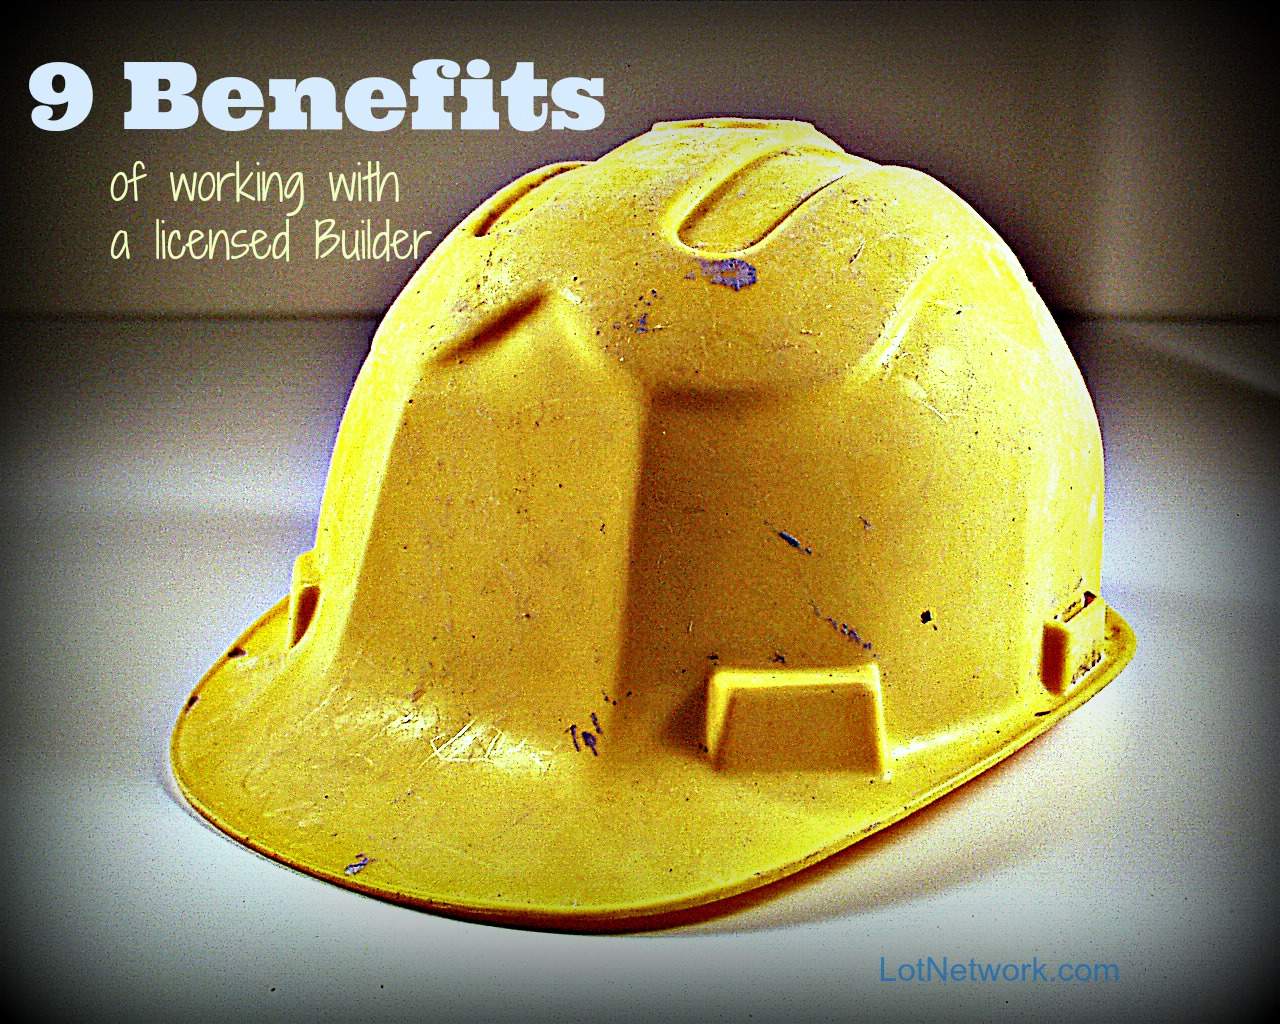 Hardhat photo with text - 9 Benefits of Working with a Licensed Builder